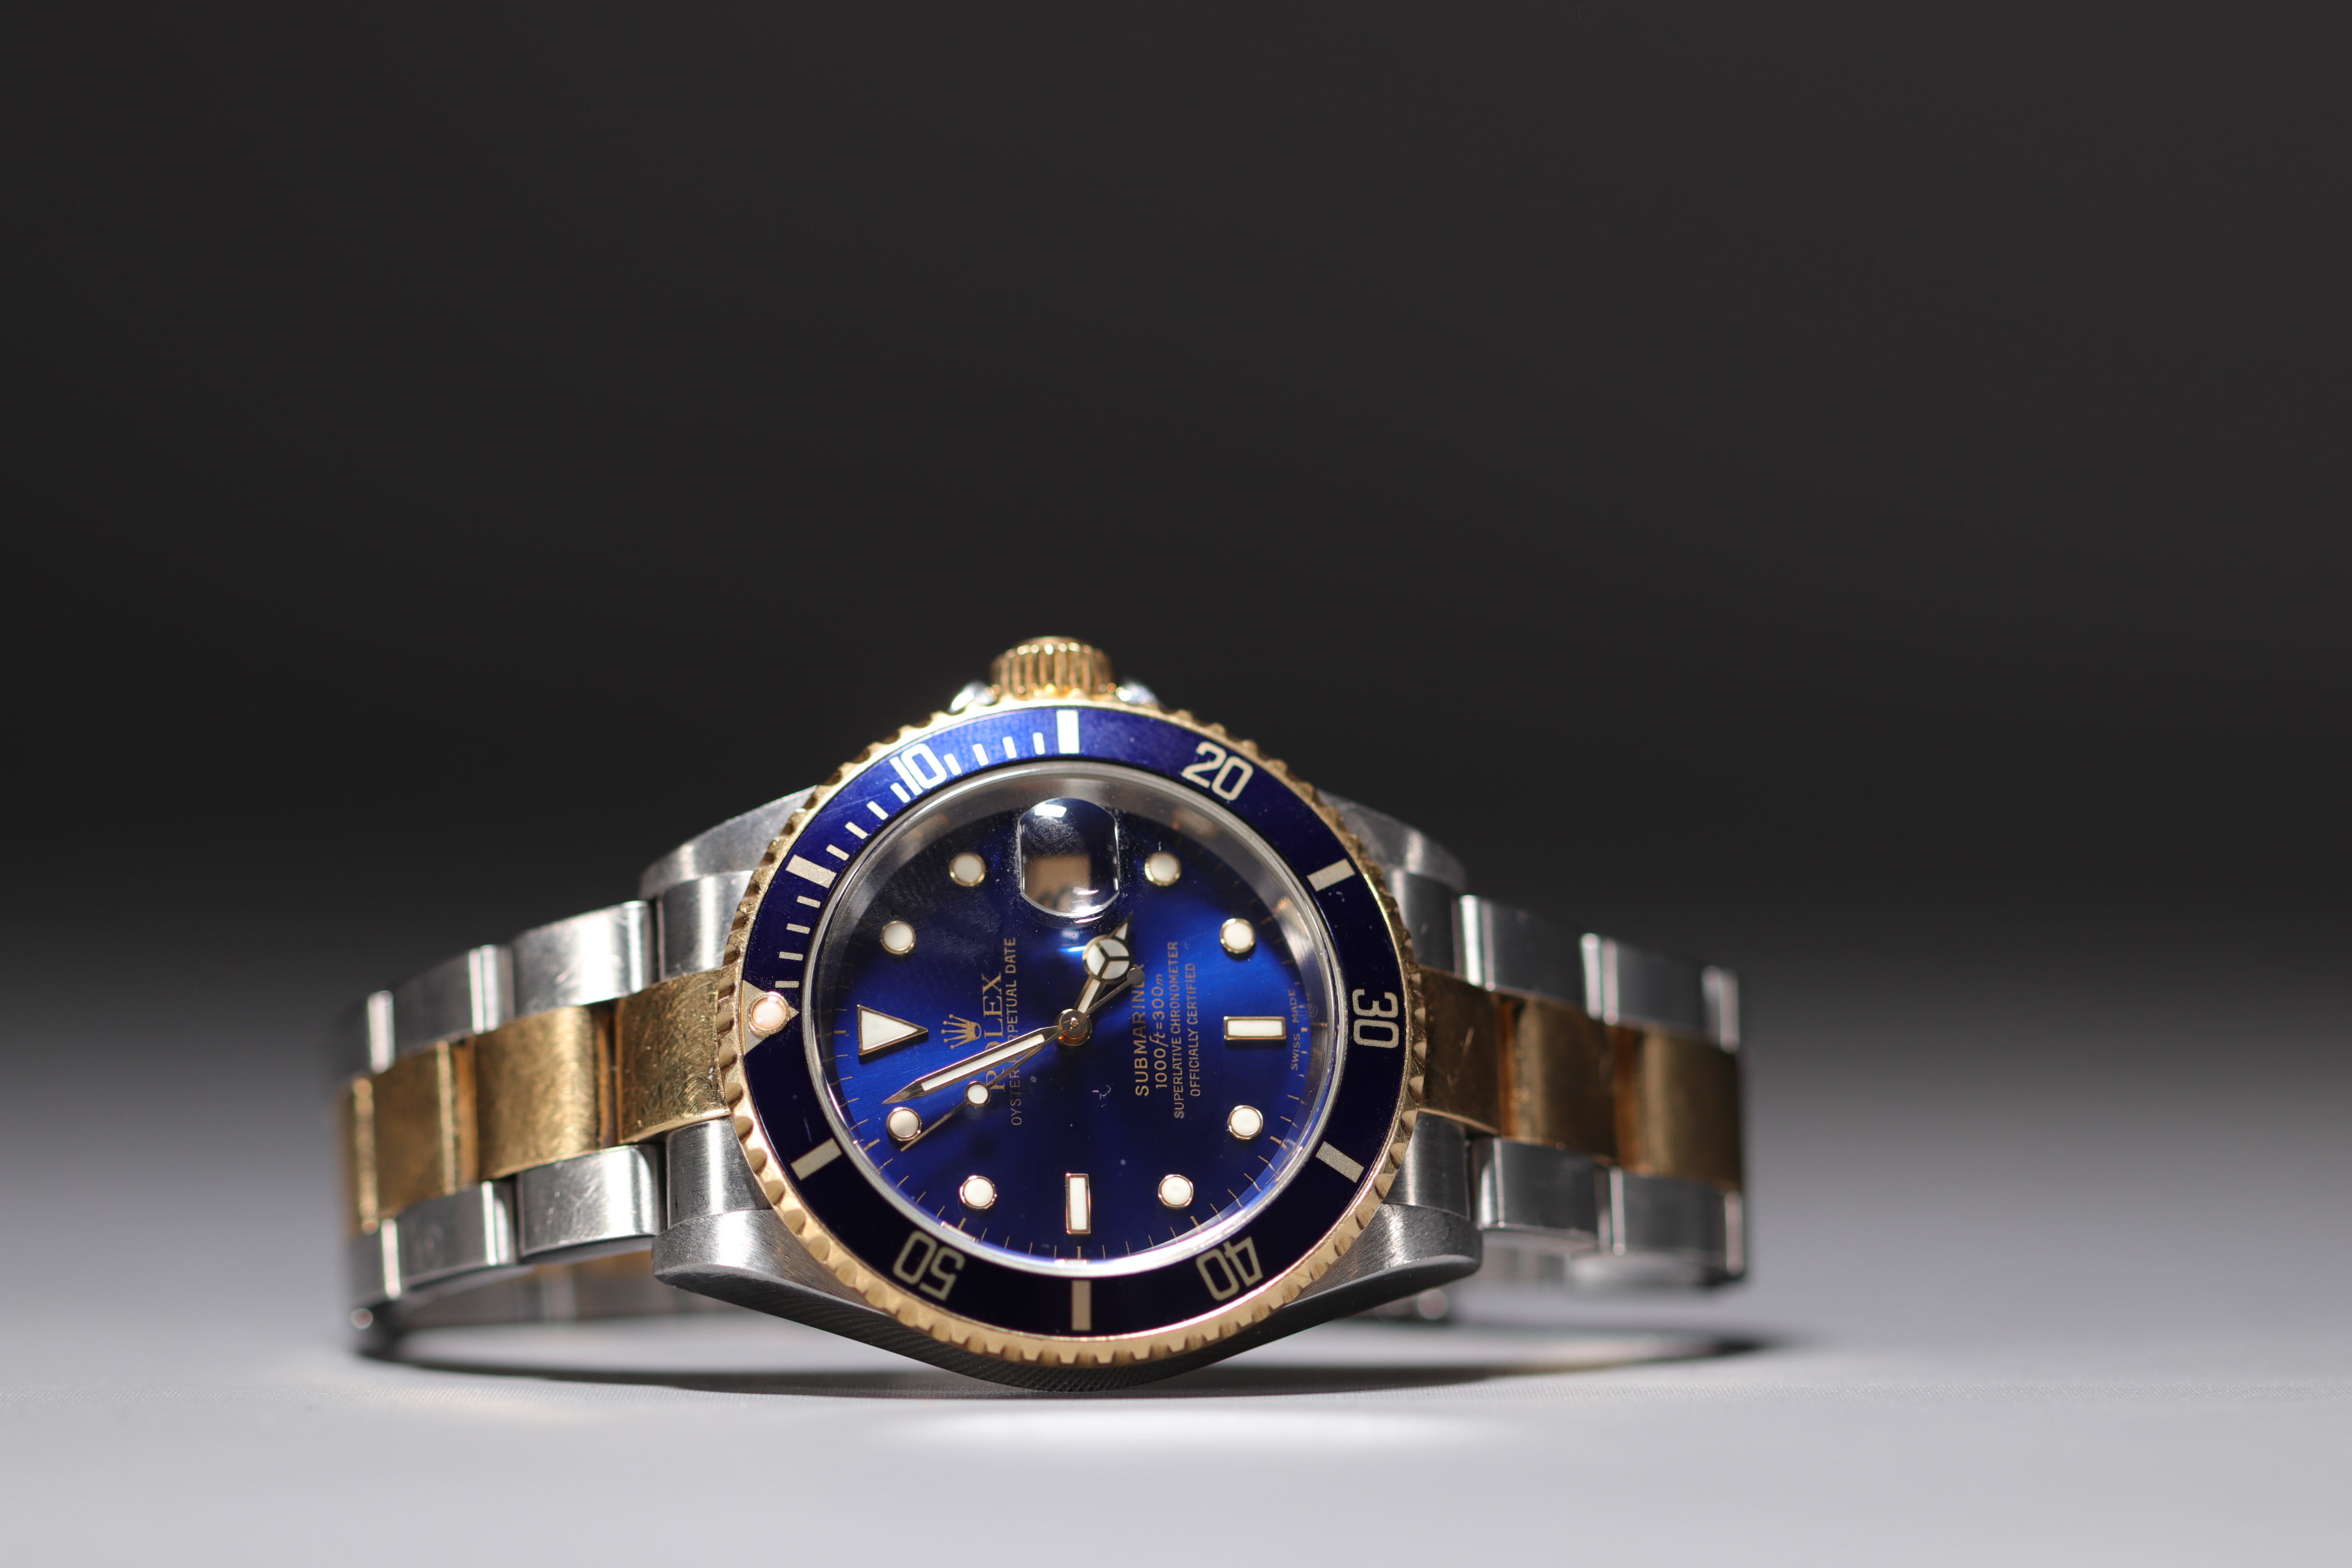 Rolex Submariner "Sultan" Oyster Perpetual Date 18k yellow gold and steel (16613) Full Set, year 200 - Image 3 of 3